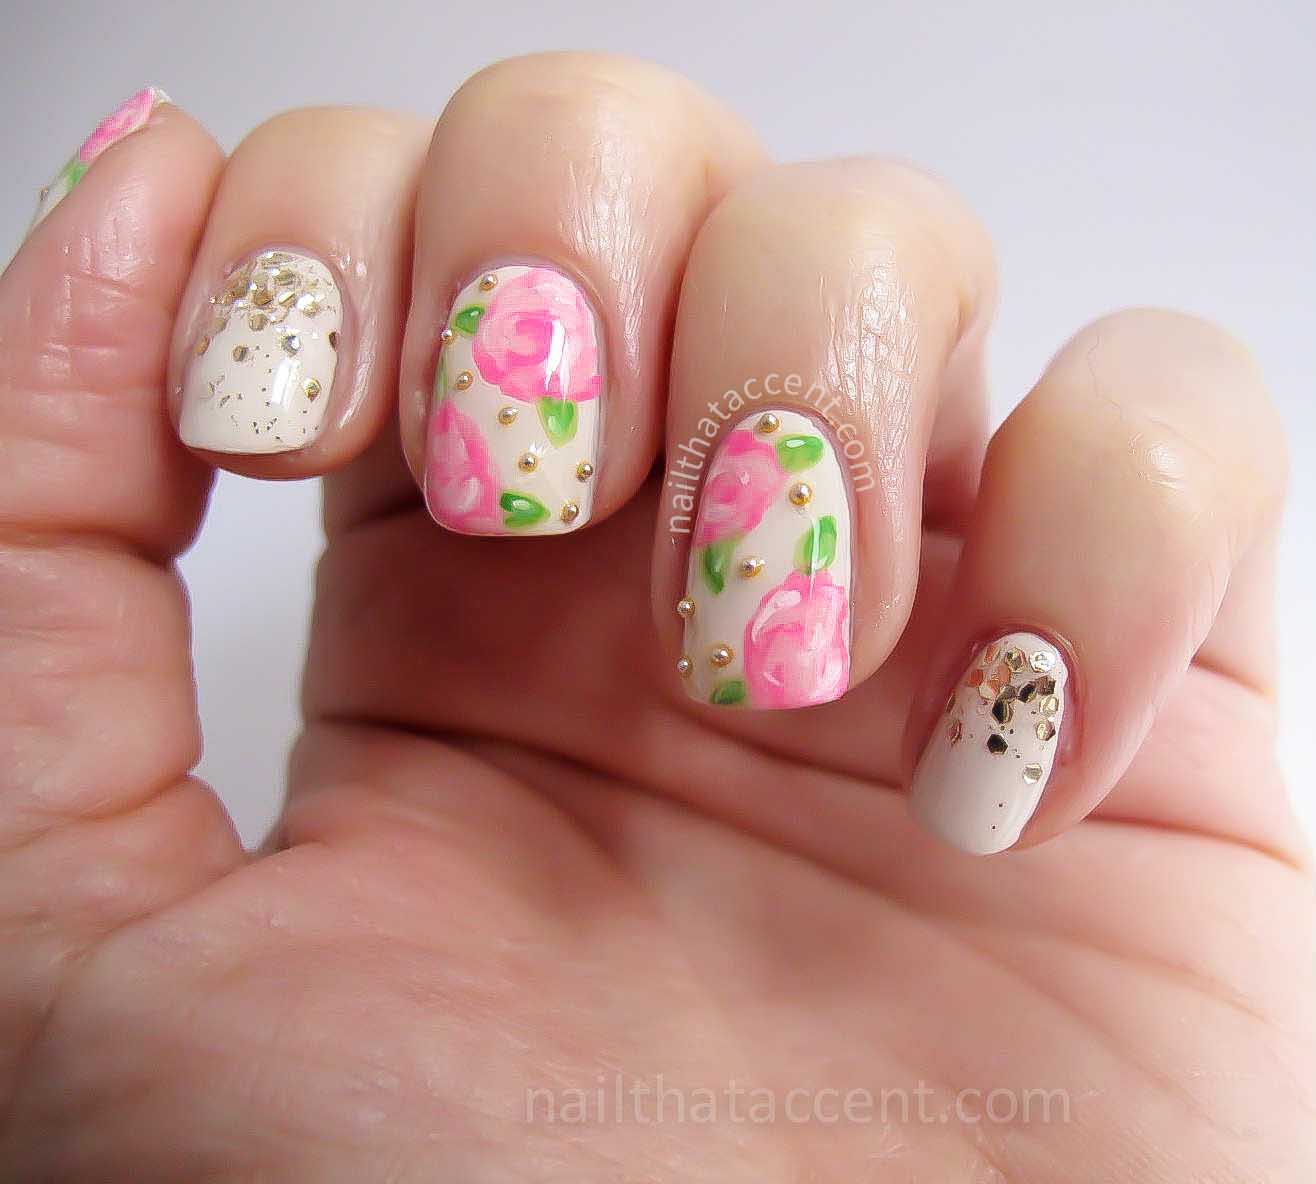 Floral Design Nails With Gold Caviar Nail Art